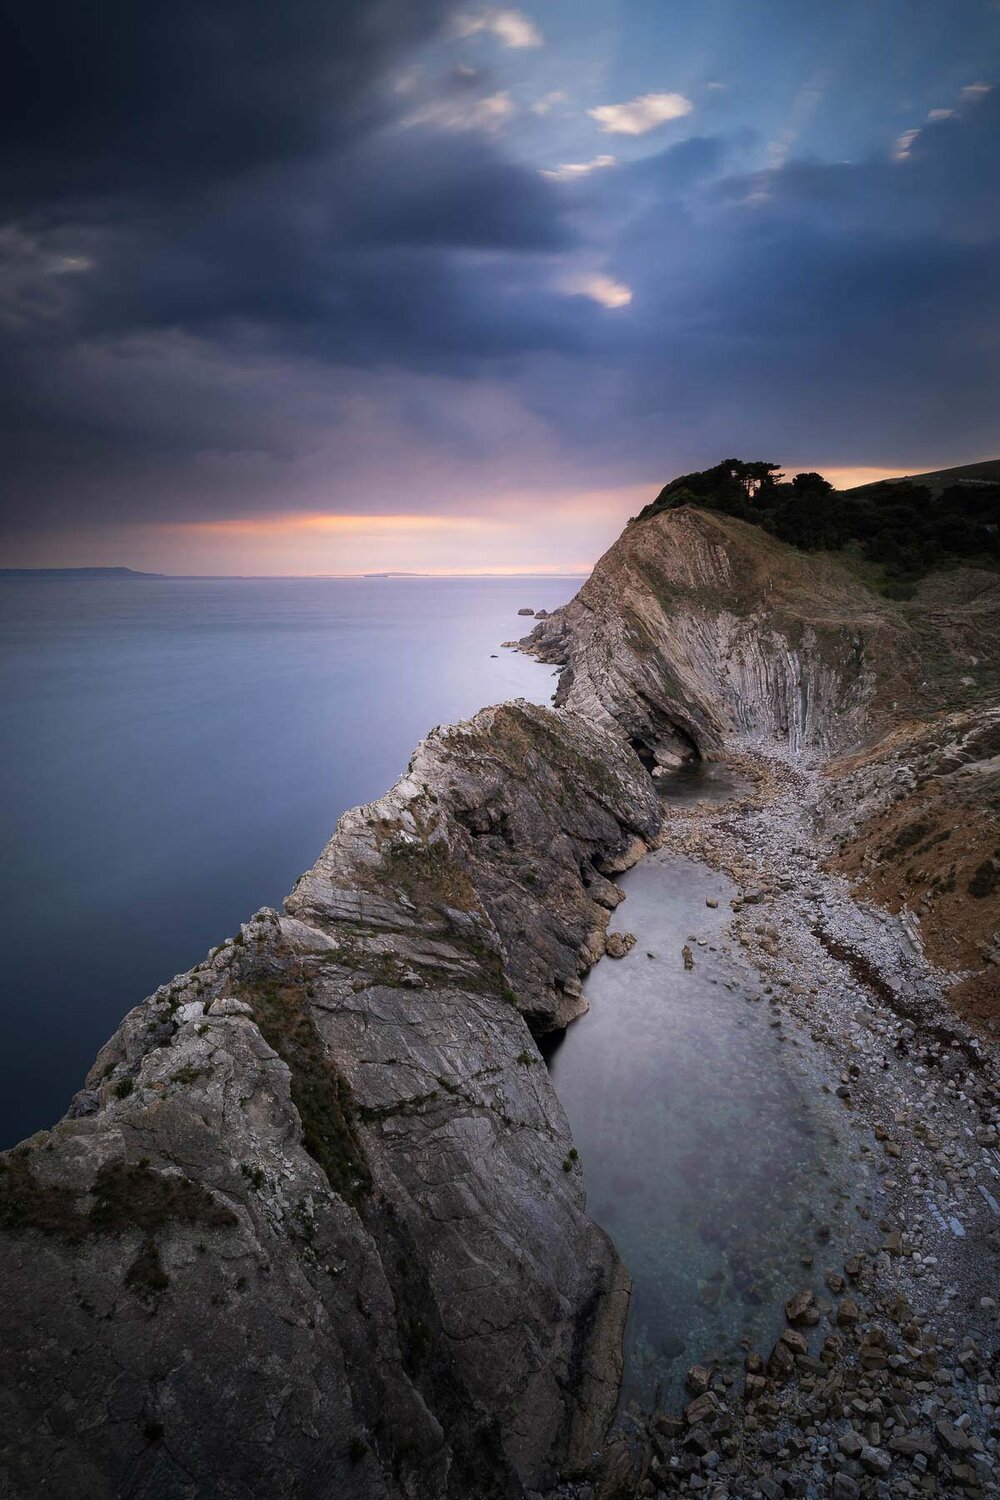 Stormy Sunset at Stair Hole, Dorset (Copy)